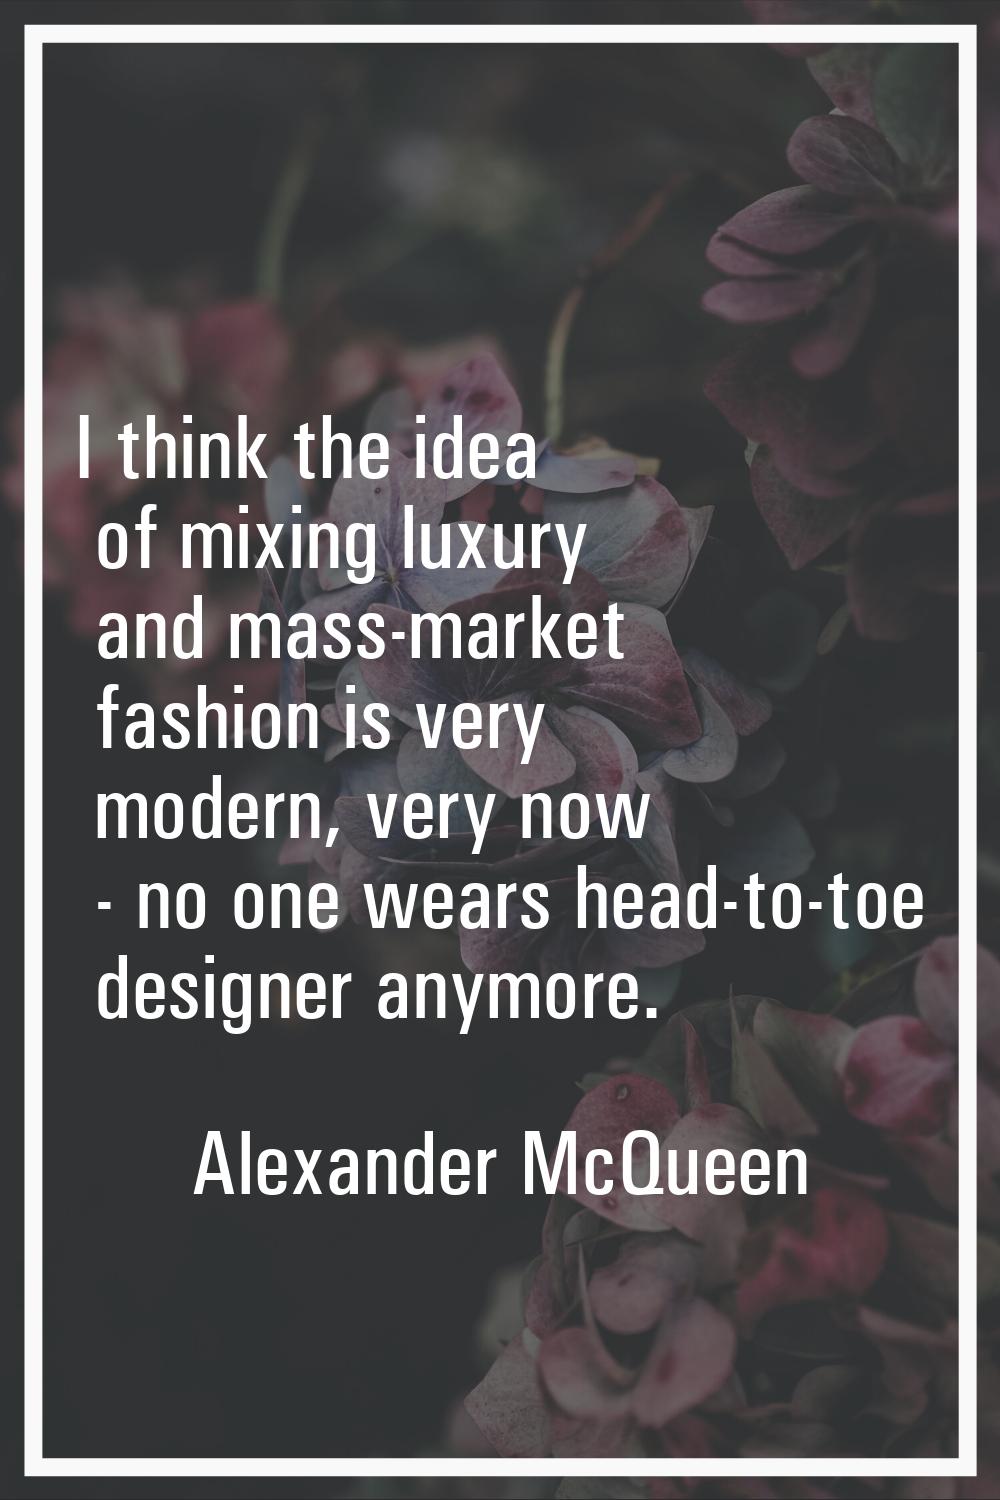 I think the idea of mixing luxury and mass-market fashion is very modern, very now - no one wears h